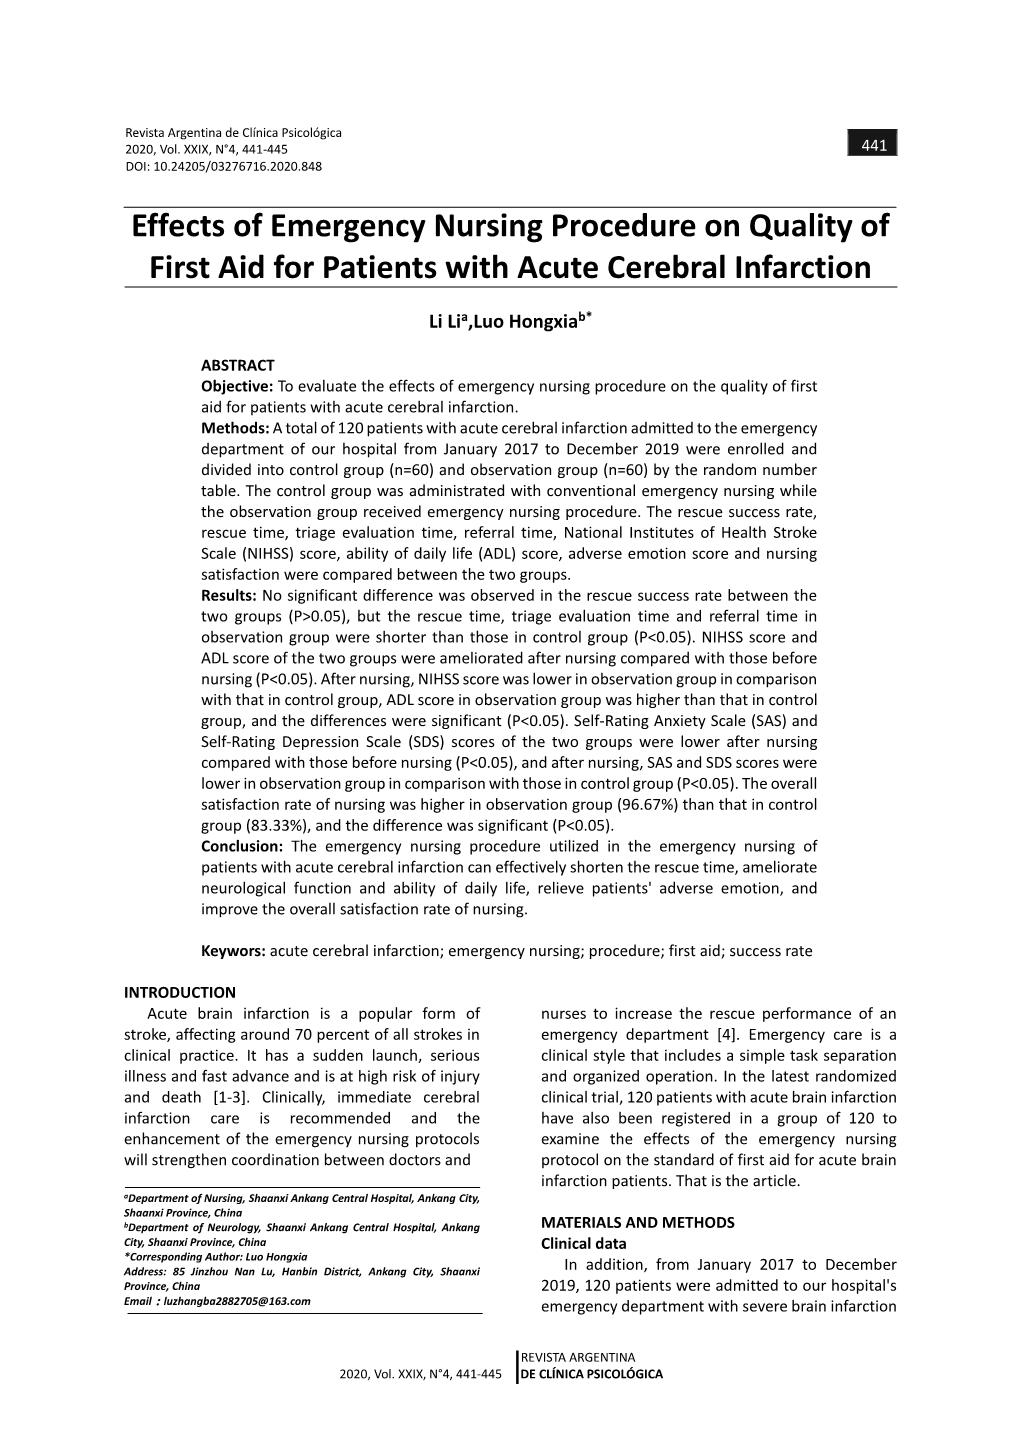 Effects of Emergency Nursing Procedure on Quality of First Aid for Patients with Acute Cerebral Infarction